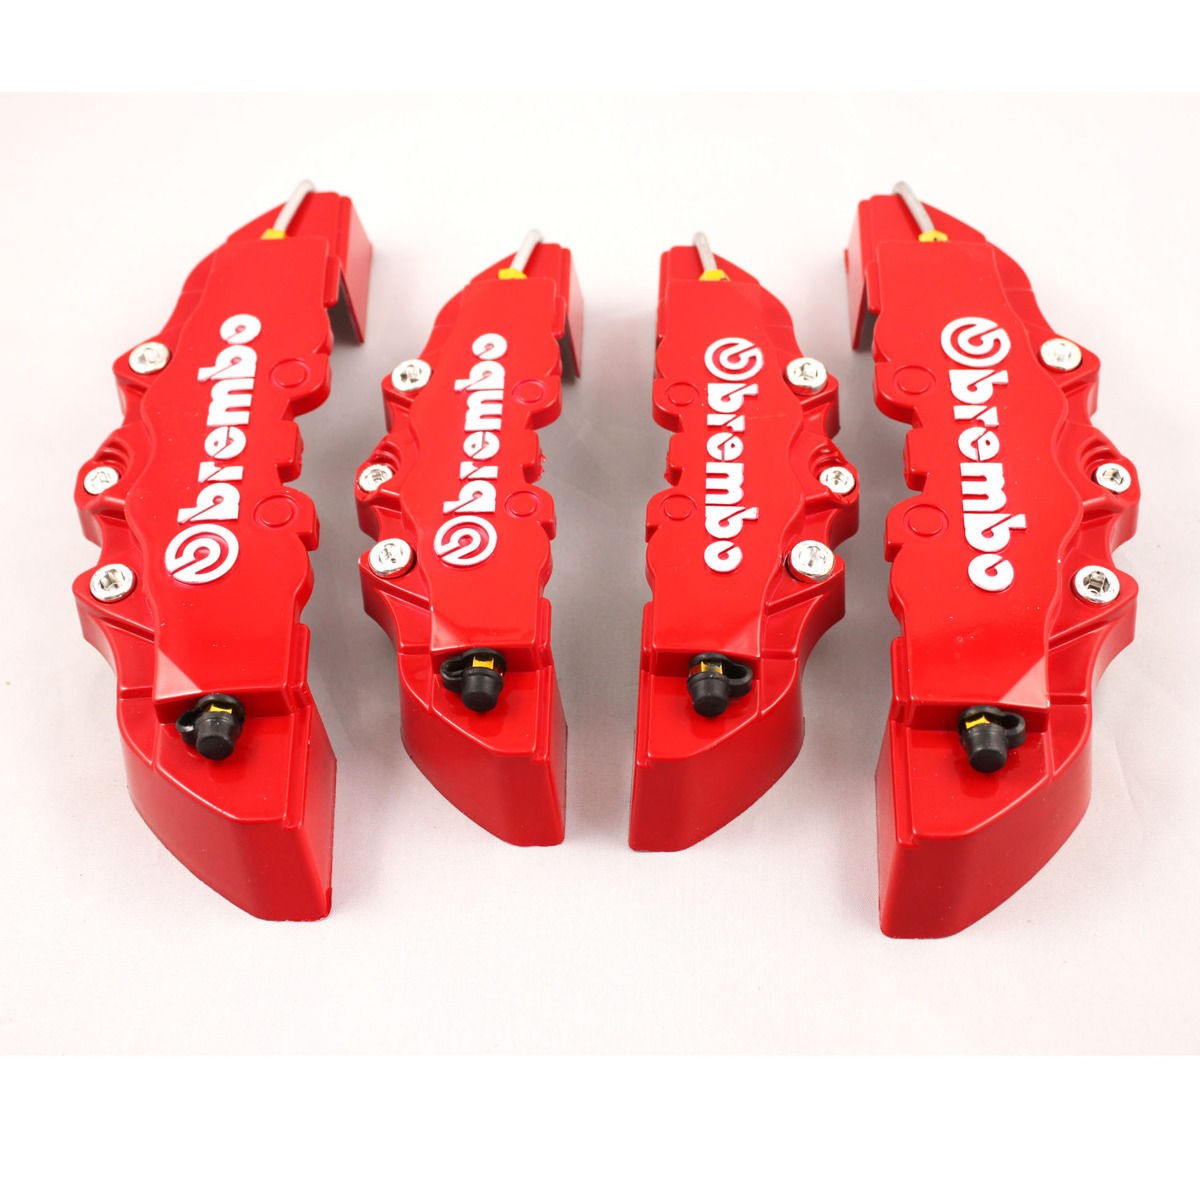 brembo-brake-caliper-fake-covers-are-a-cheap-way-to-spice-up-your-car-video_1